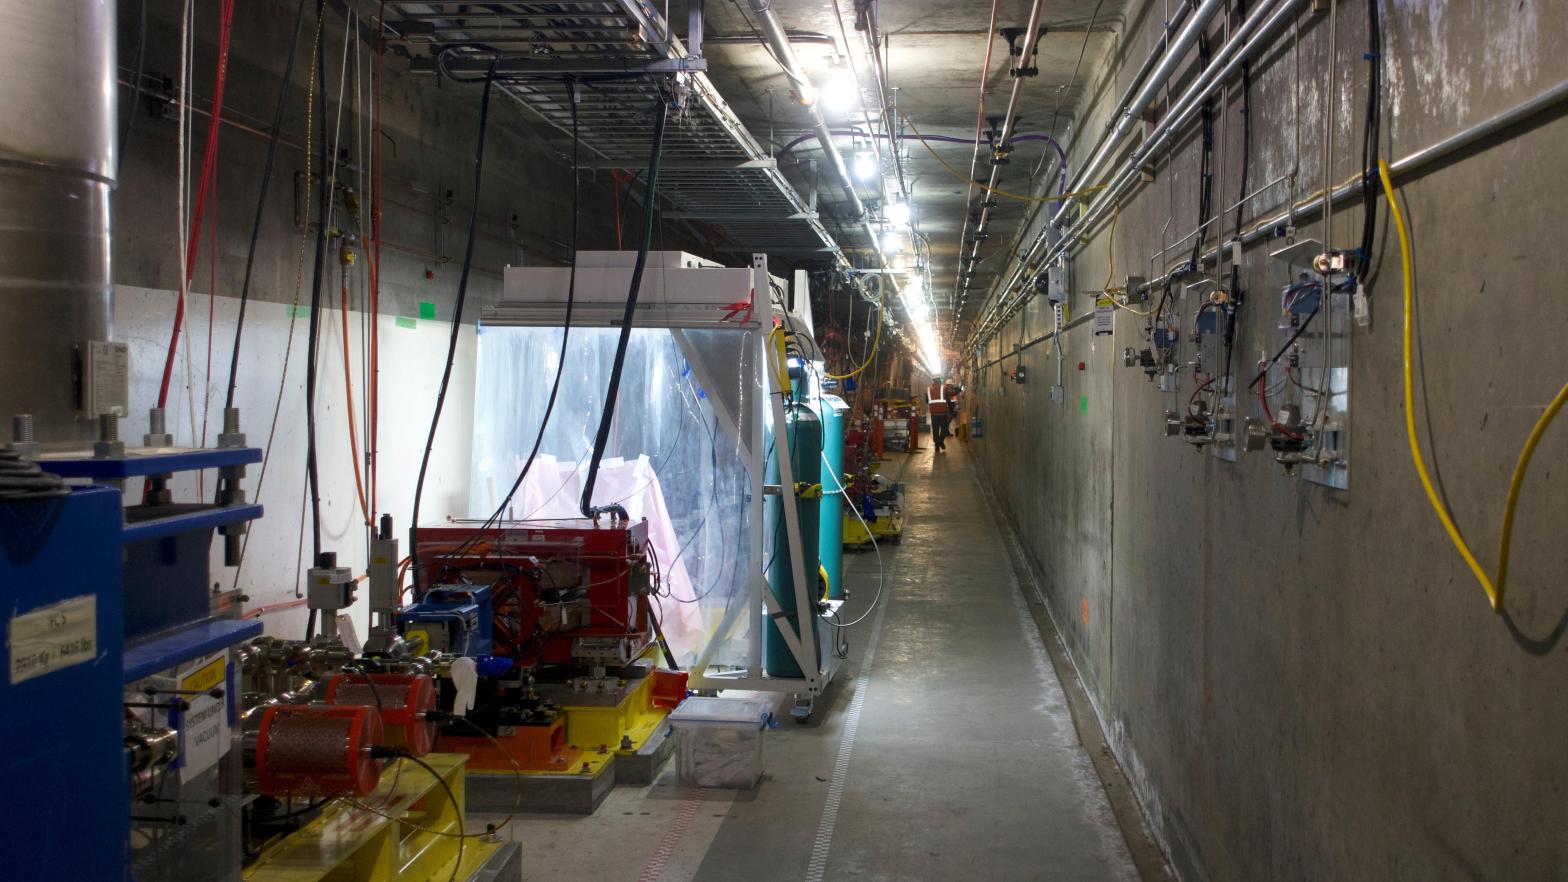 Maintenance on the laser beamline at  LCLS in October 2021. (Photo: Isaac Schultz)